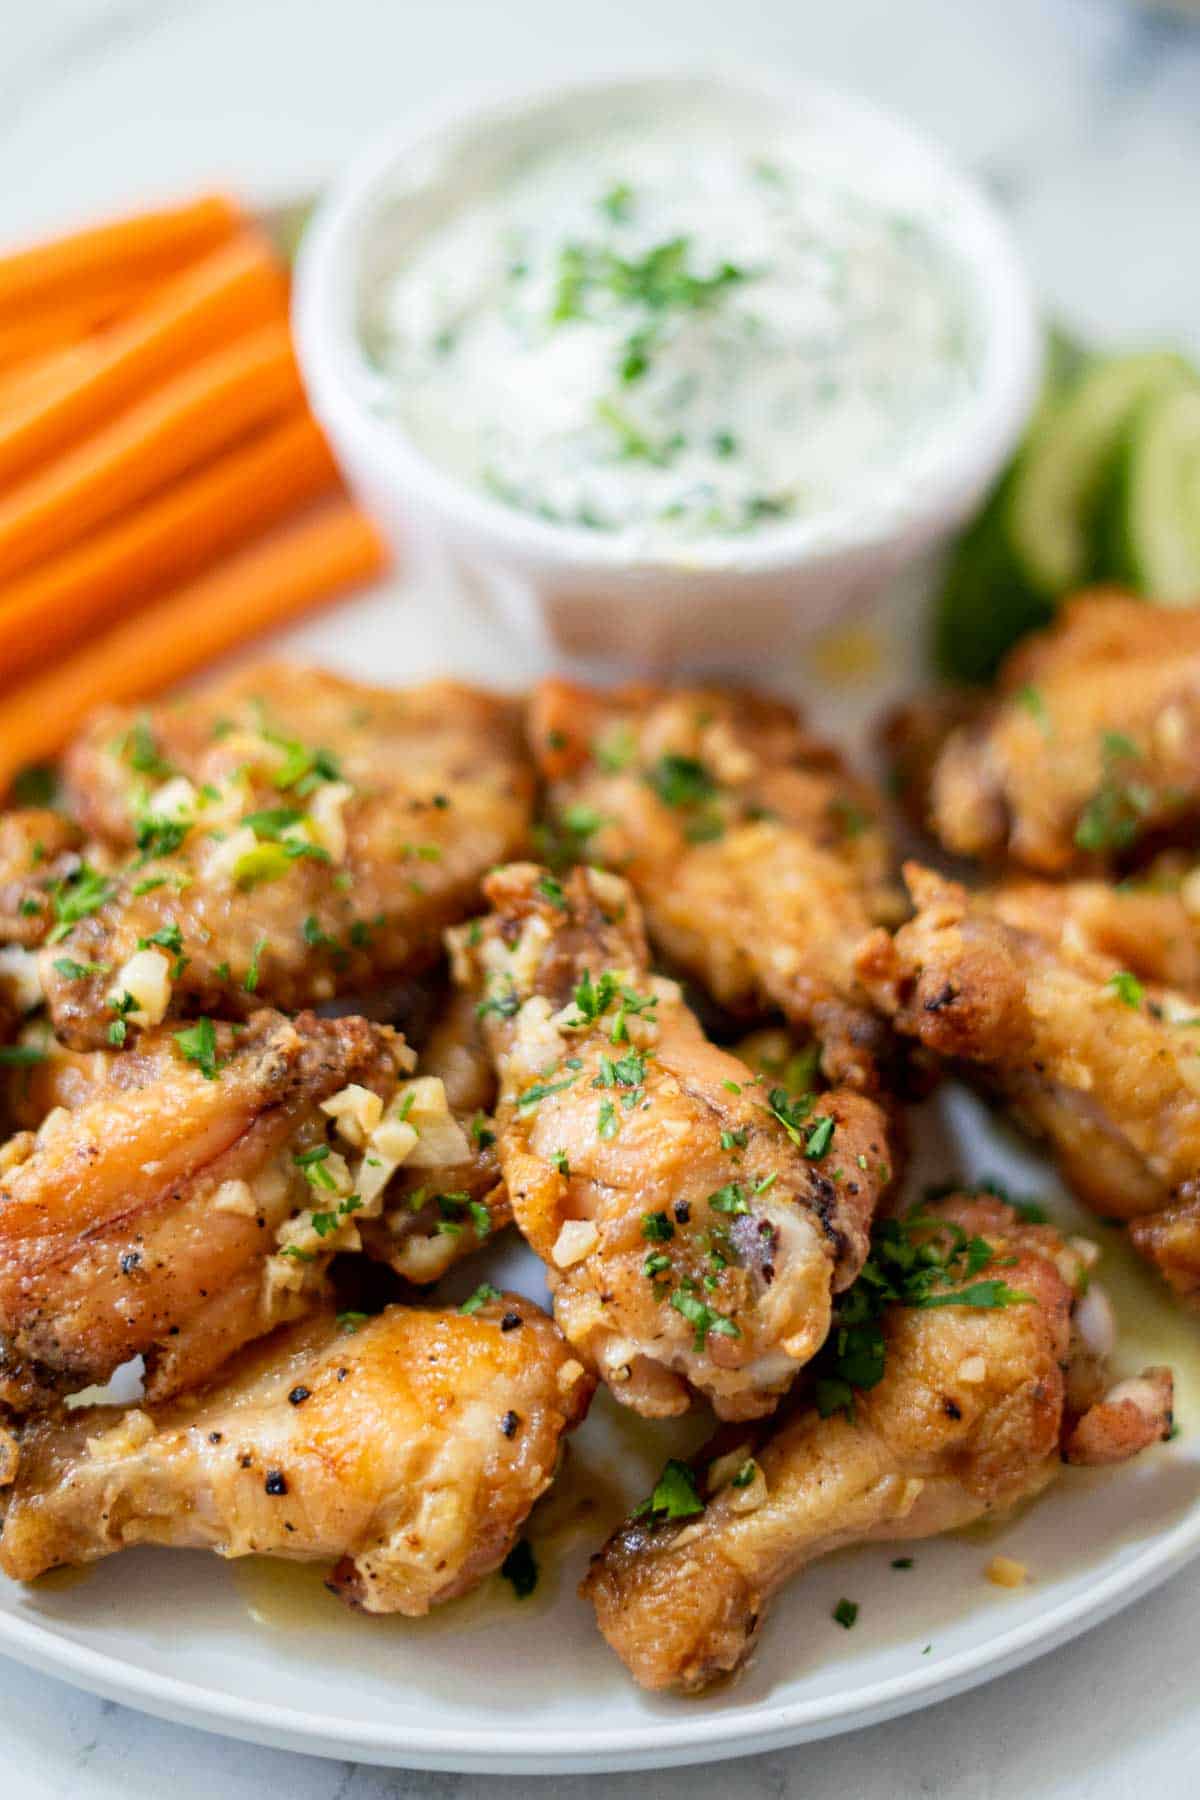 Garlic chicken wings with herbs on a plate.